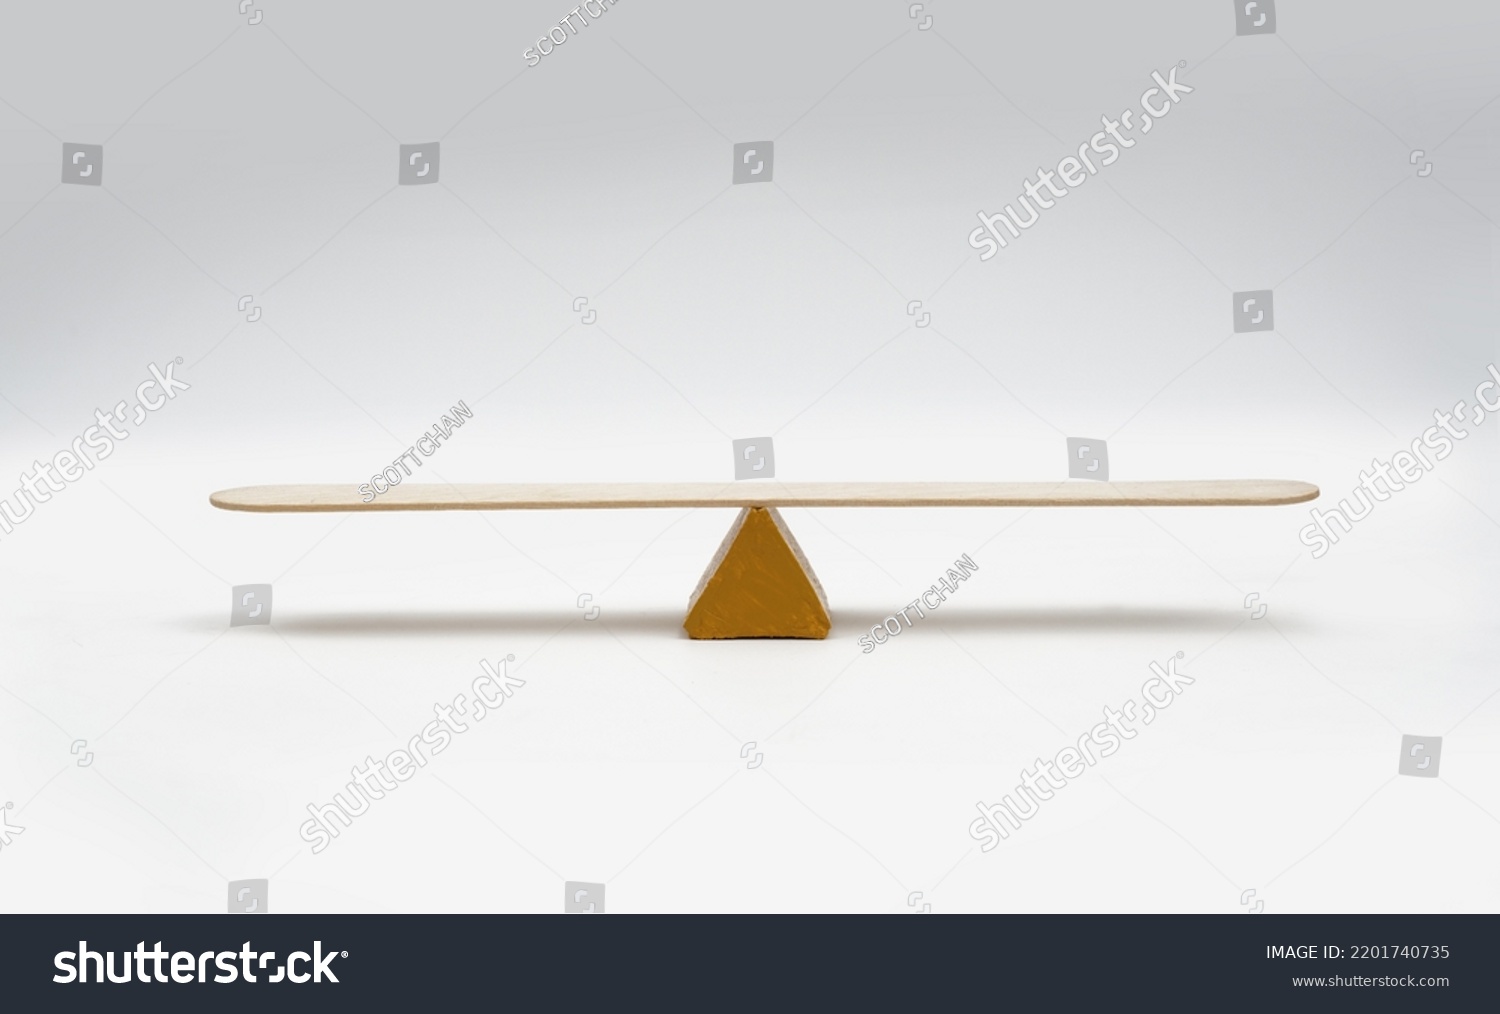 Empty seesaw balancing on white background.
 #2201740735